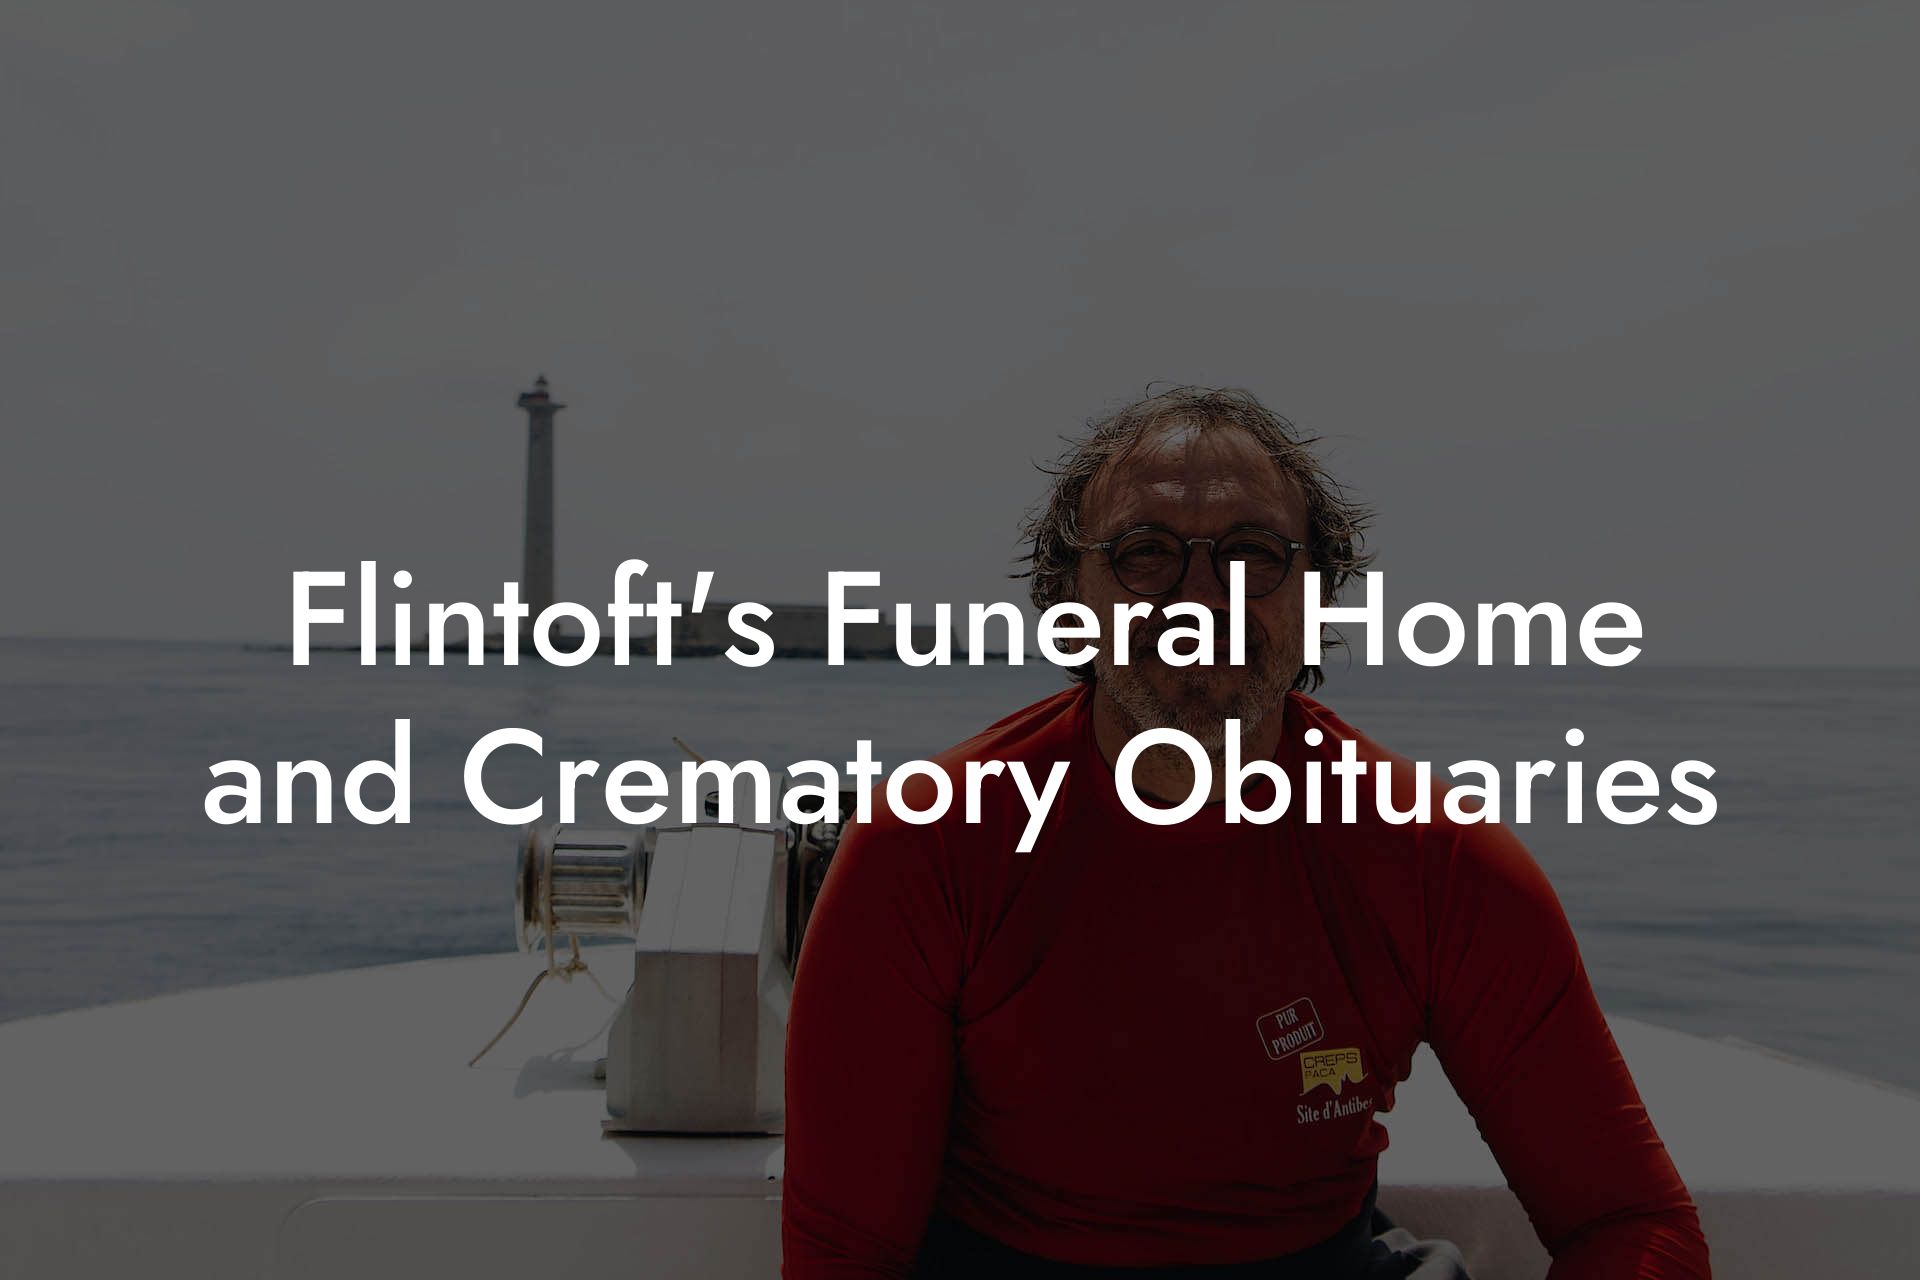 Flintoft's Funeral Home and Crematory Obituaries